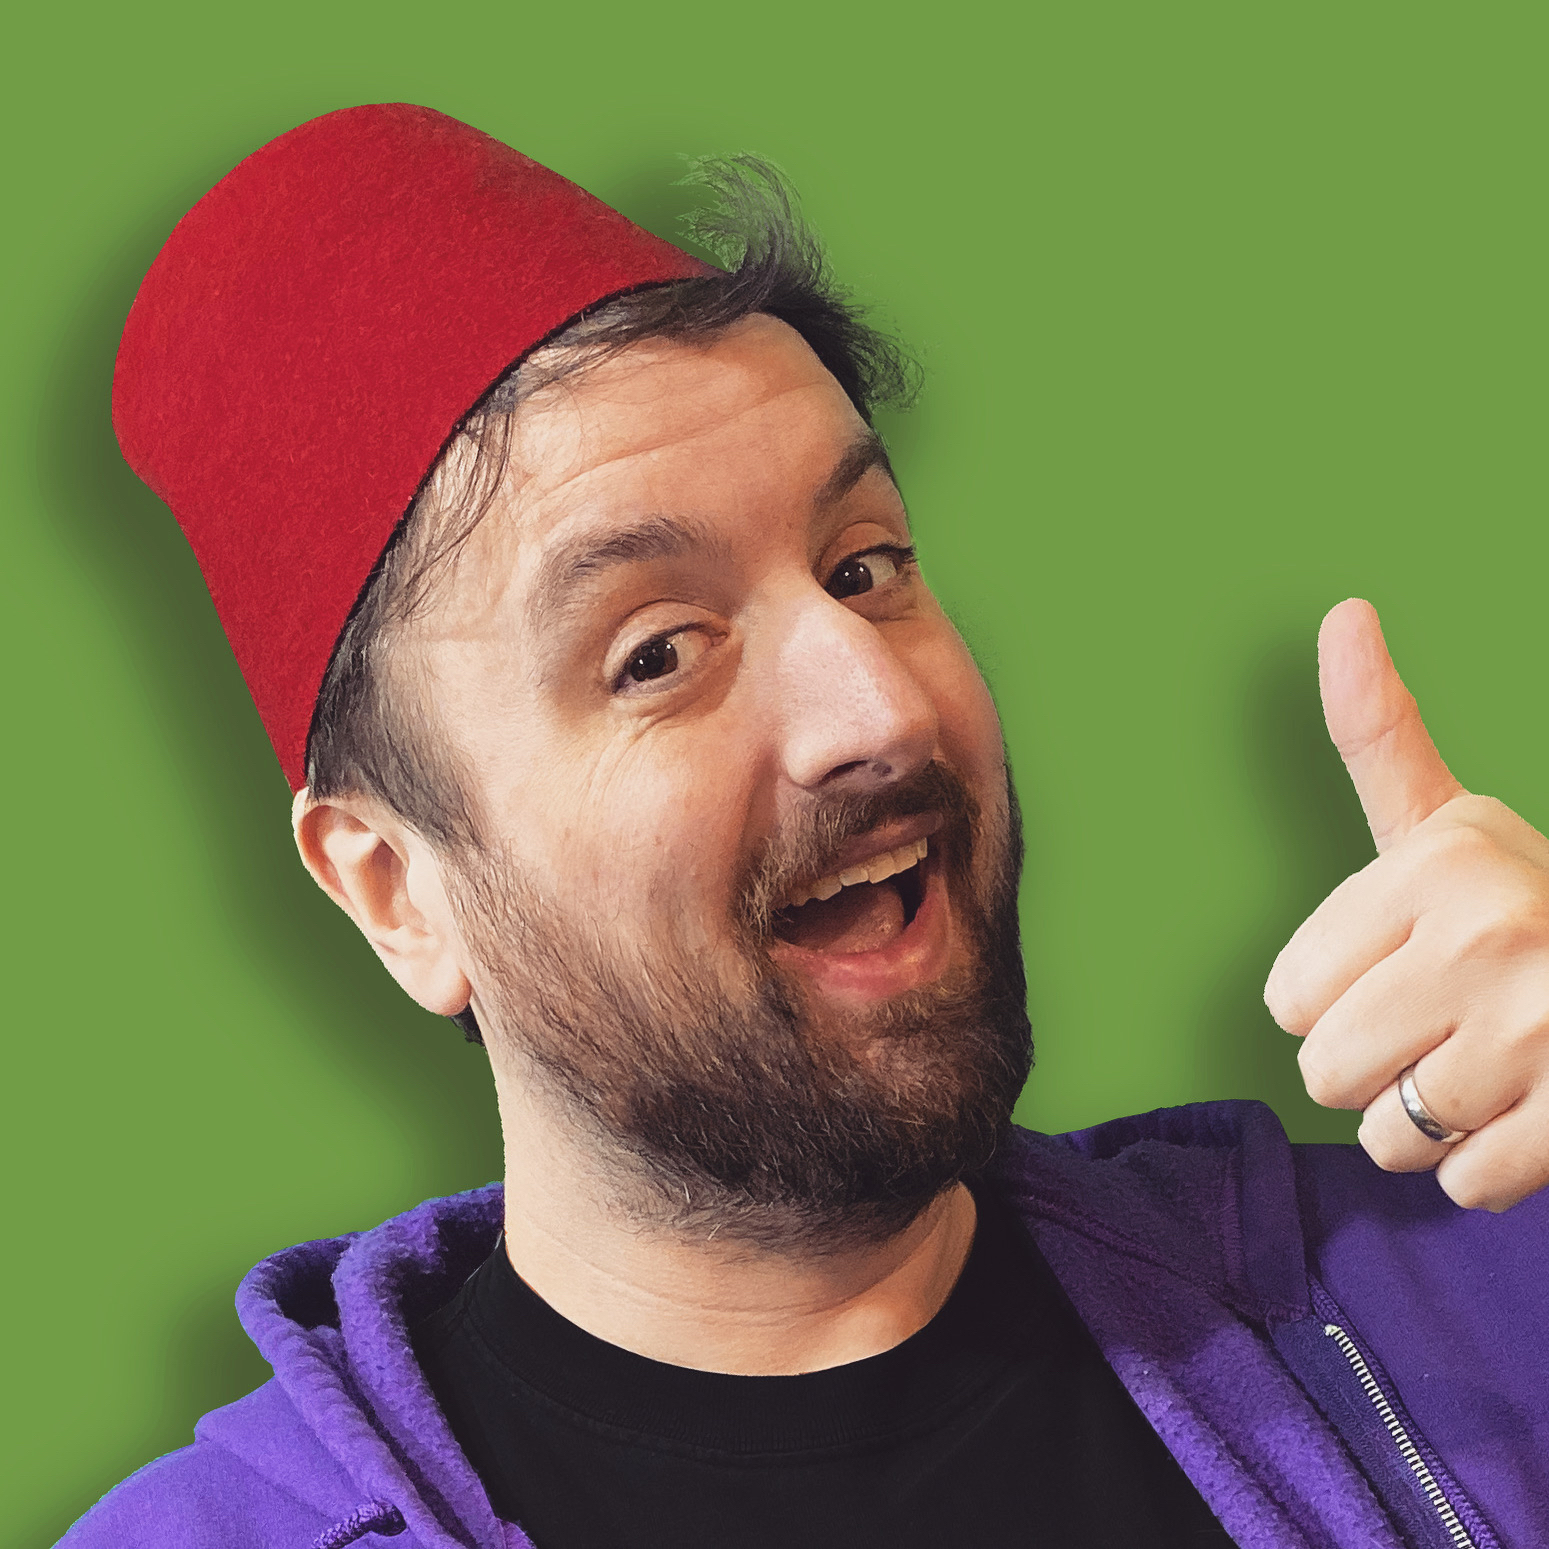 DrGluon smiling, wearing his trademark red fez, and giving a "thumbs up"